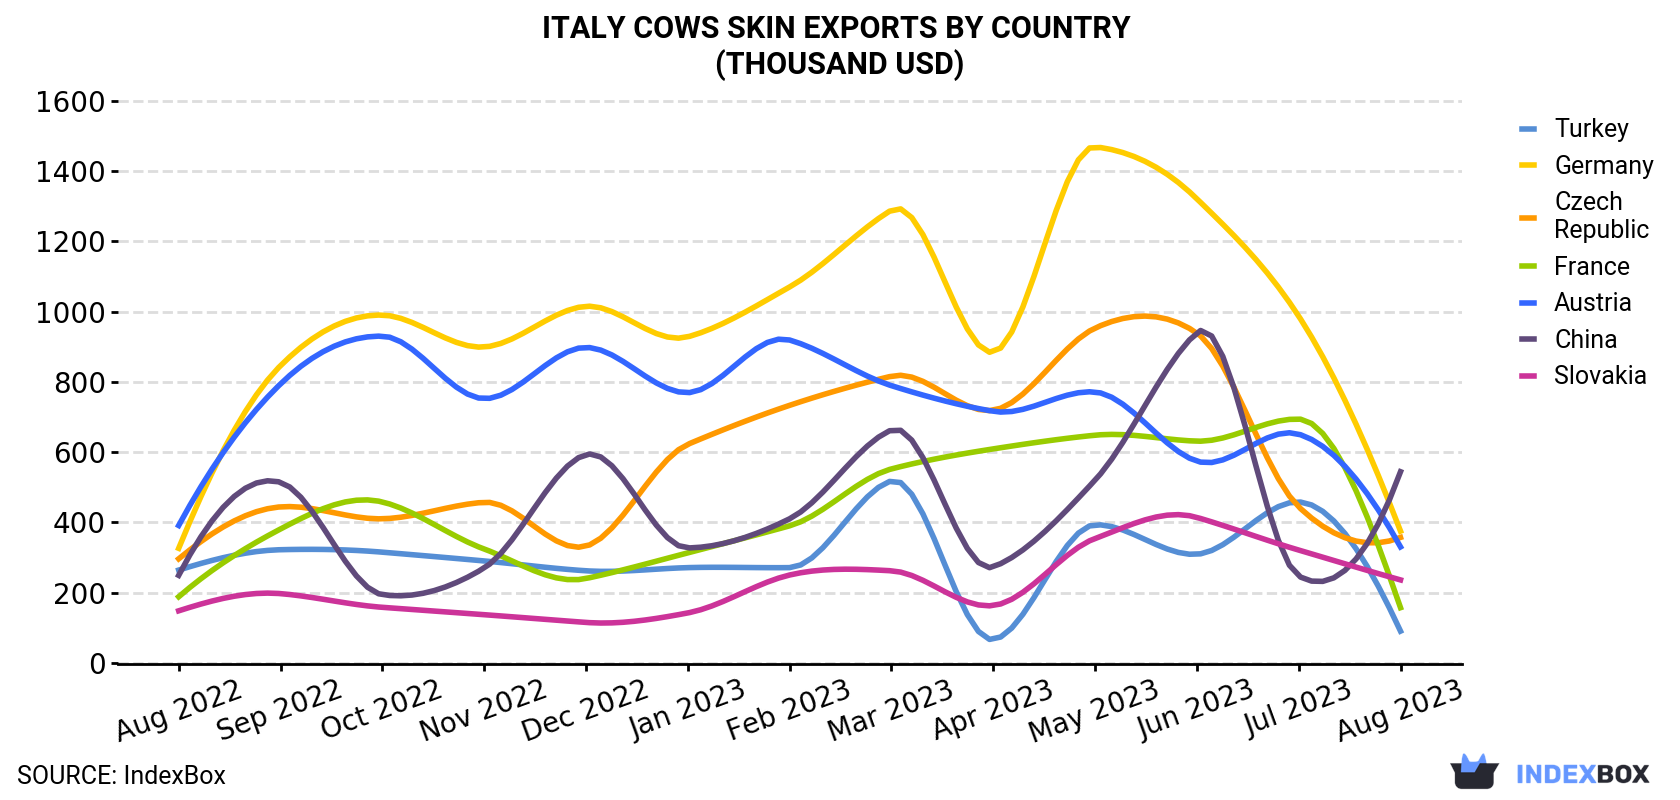 Italy Cows Skin Exports By Country (Thousand USD)